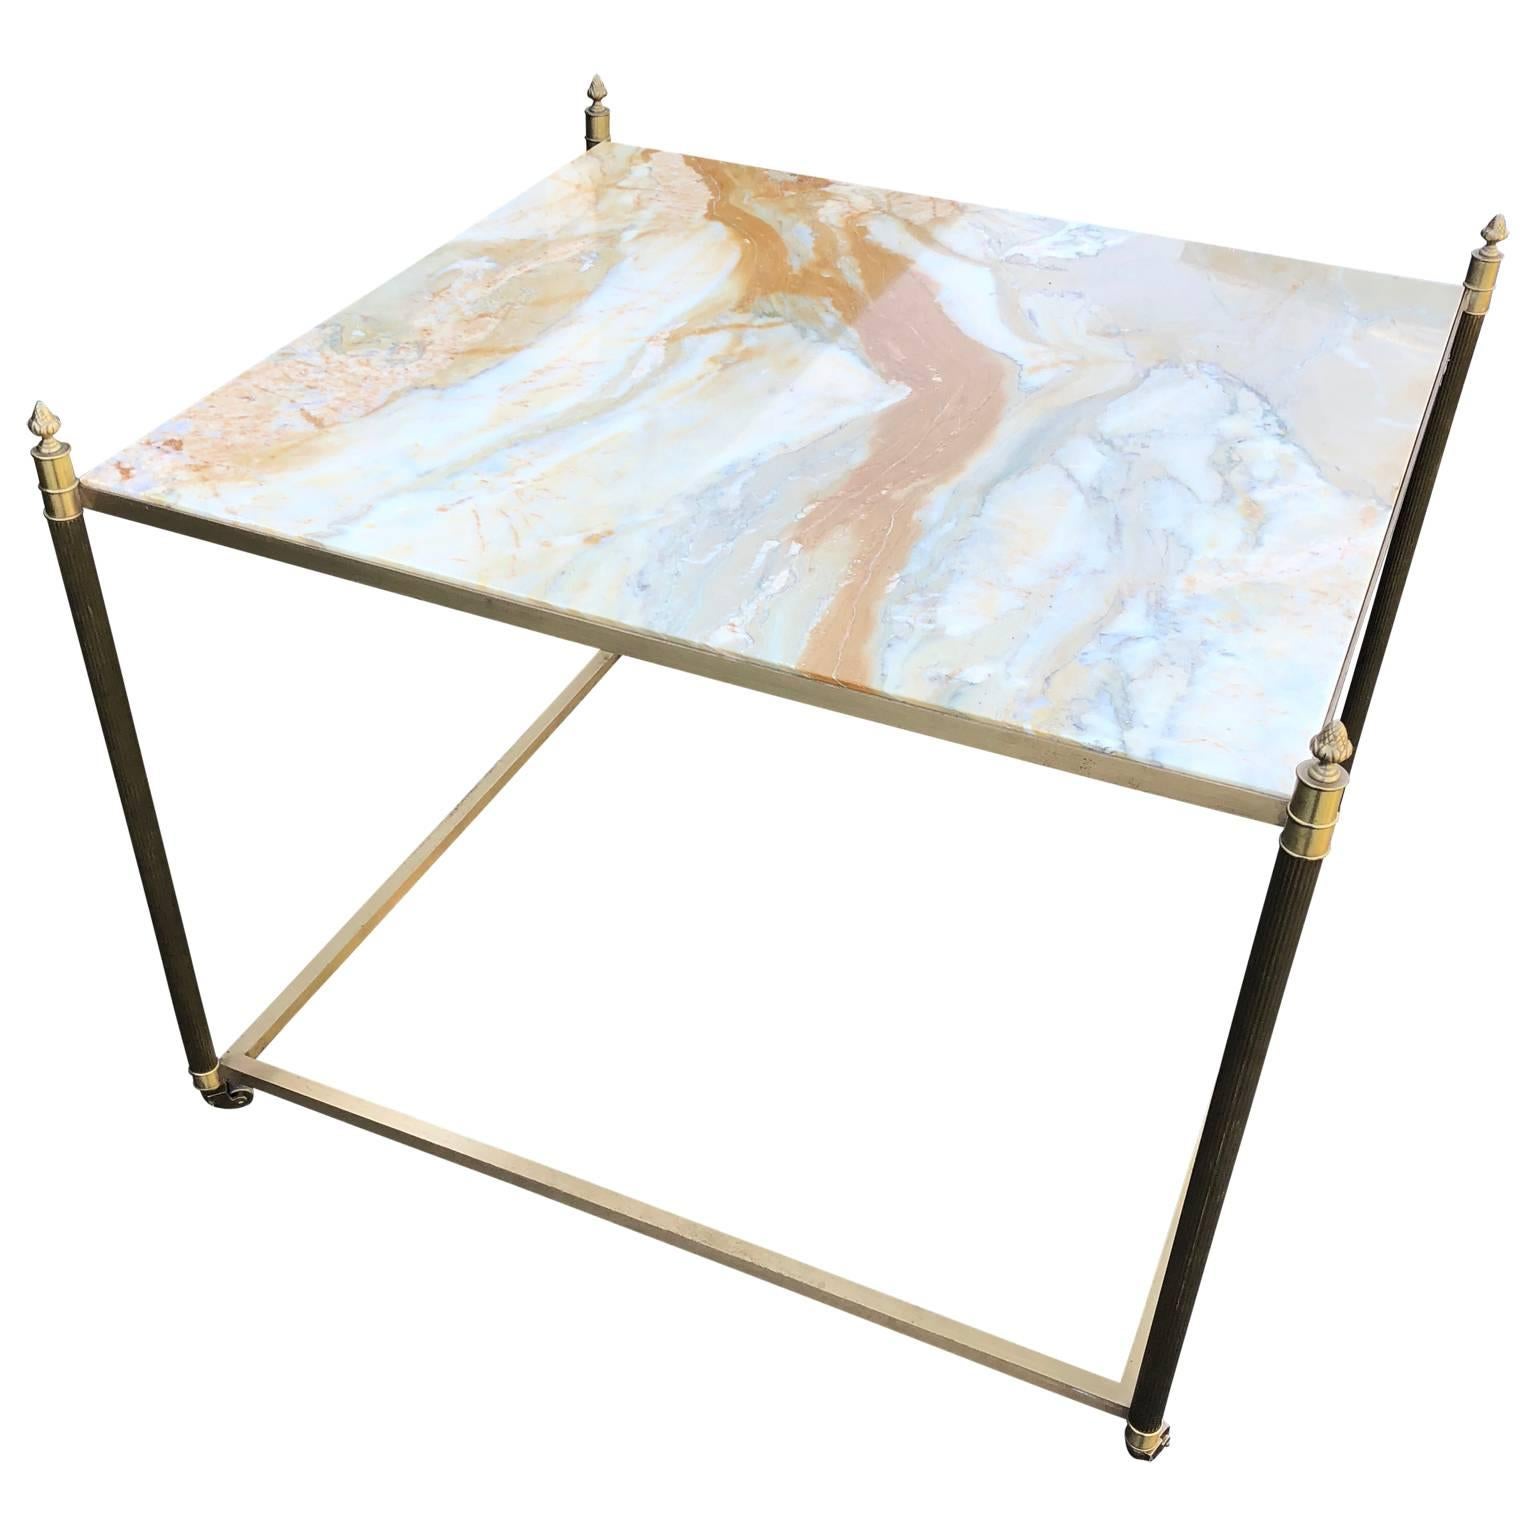 20th Century Large Square Onyx and Brass Coffee, Sofa or Cocktail Table by Maison Bagués For Sale